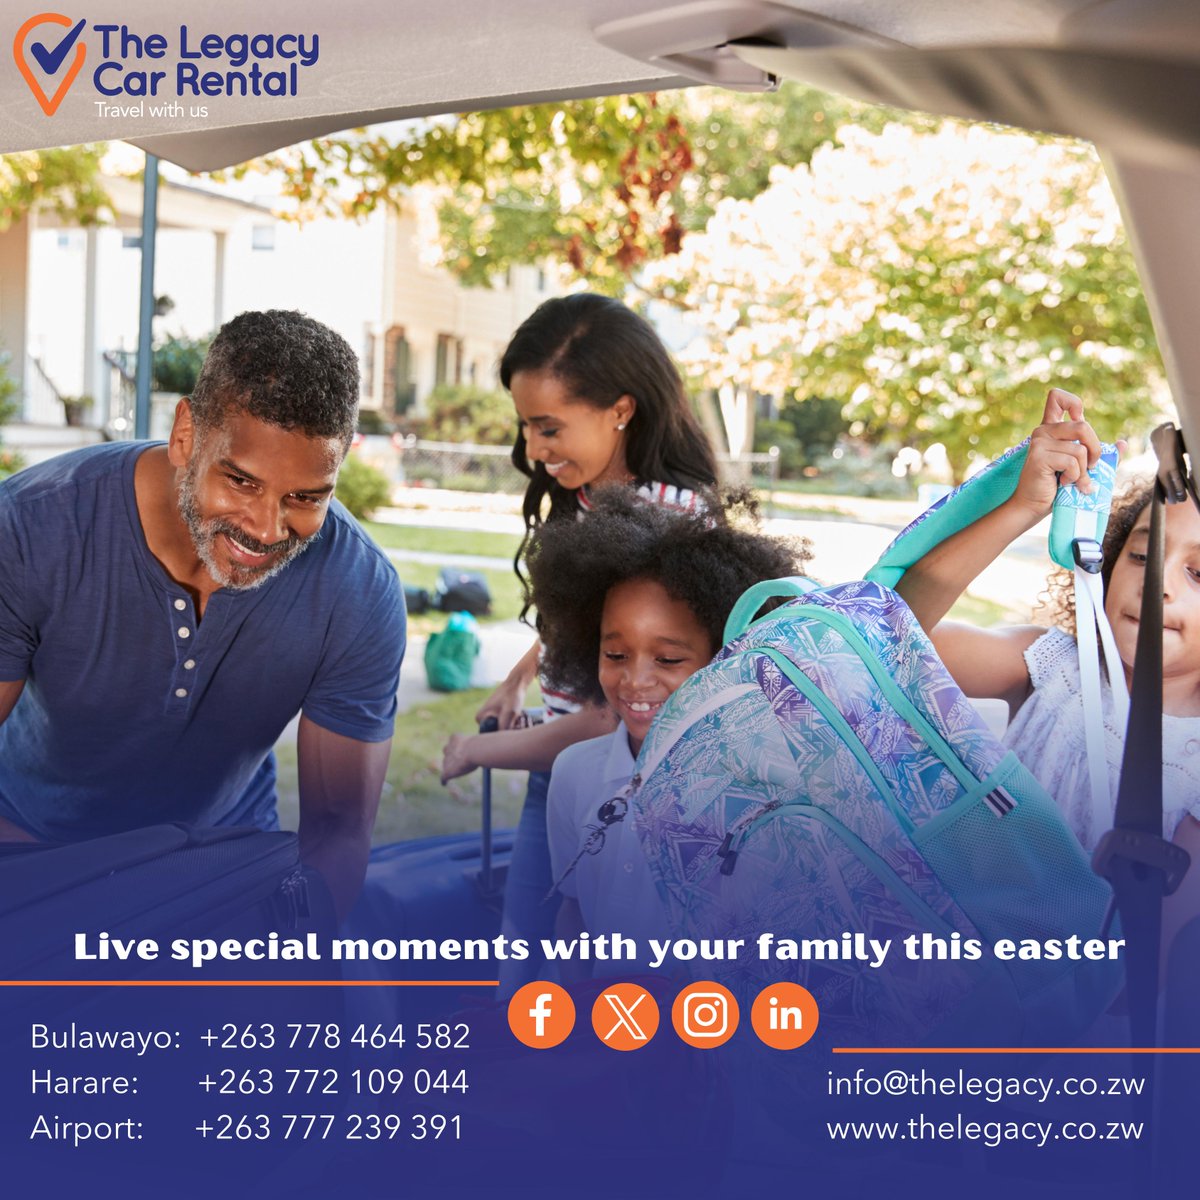 The Legacy Car Rental has got you covered for all your travel essentials. Don't miss out on our Easter holiday deals!
Enjoy 10% off all rentals for returning clients. T&Cs Apply.
#easter #holidaytravel #travelwithus #holidaydeals #carhire #TravelDeals #FamilyFun